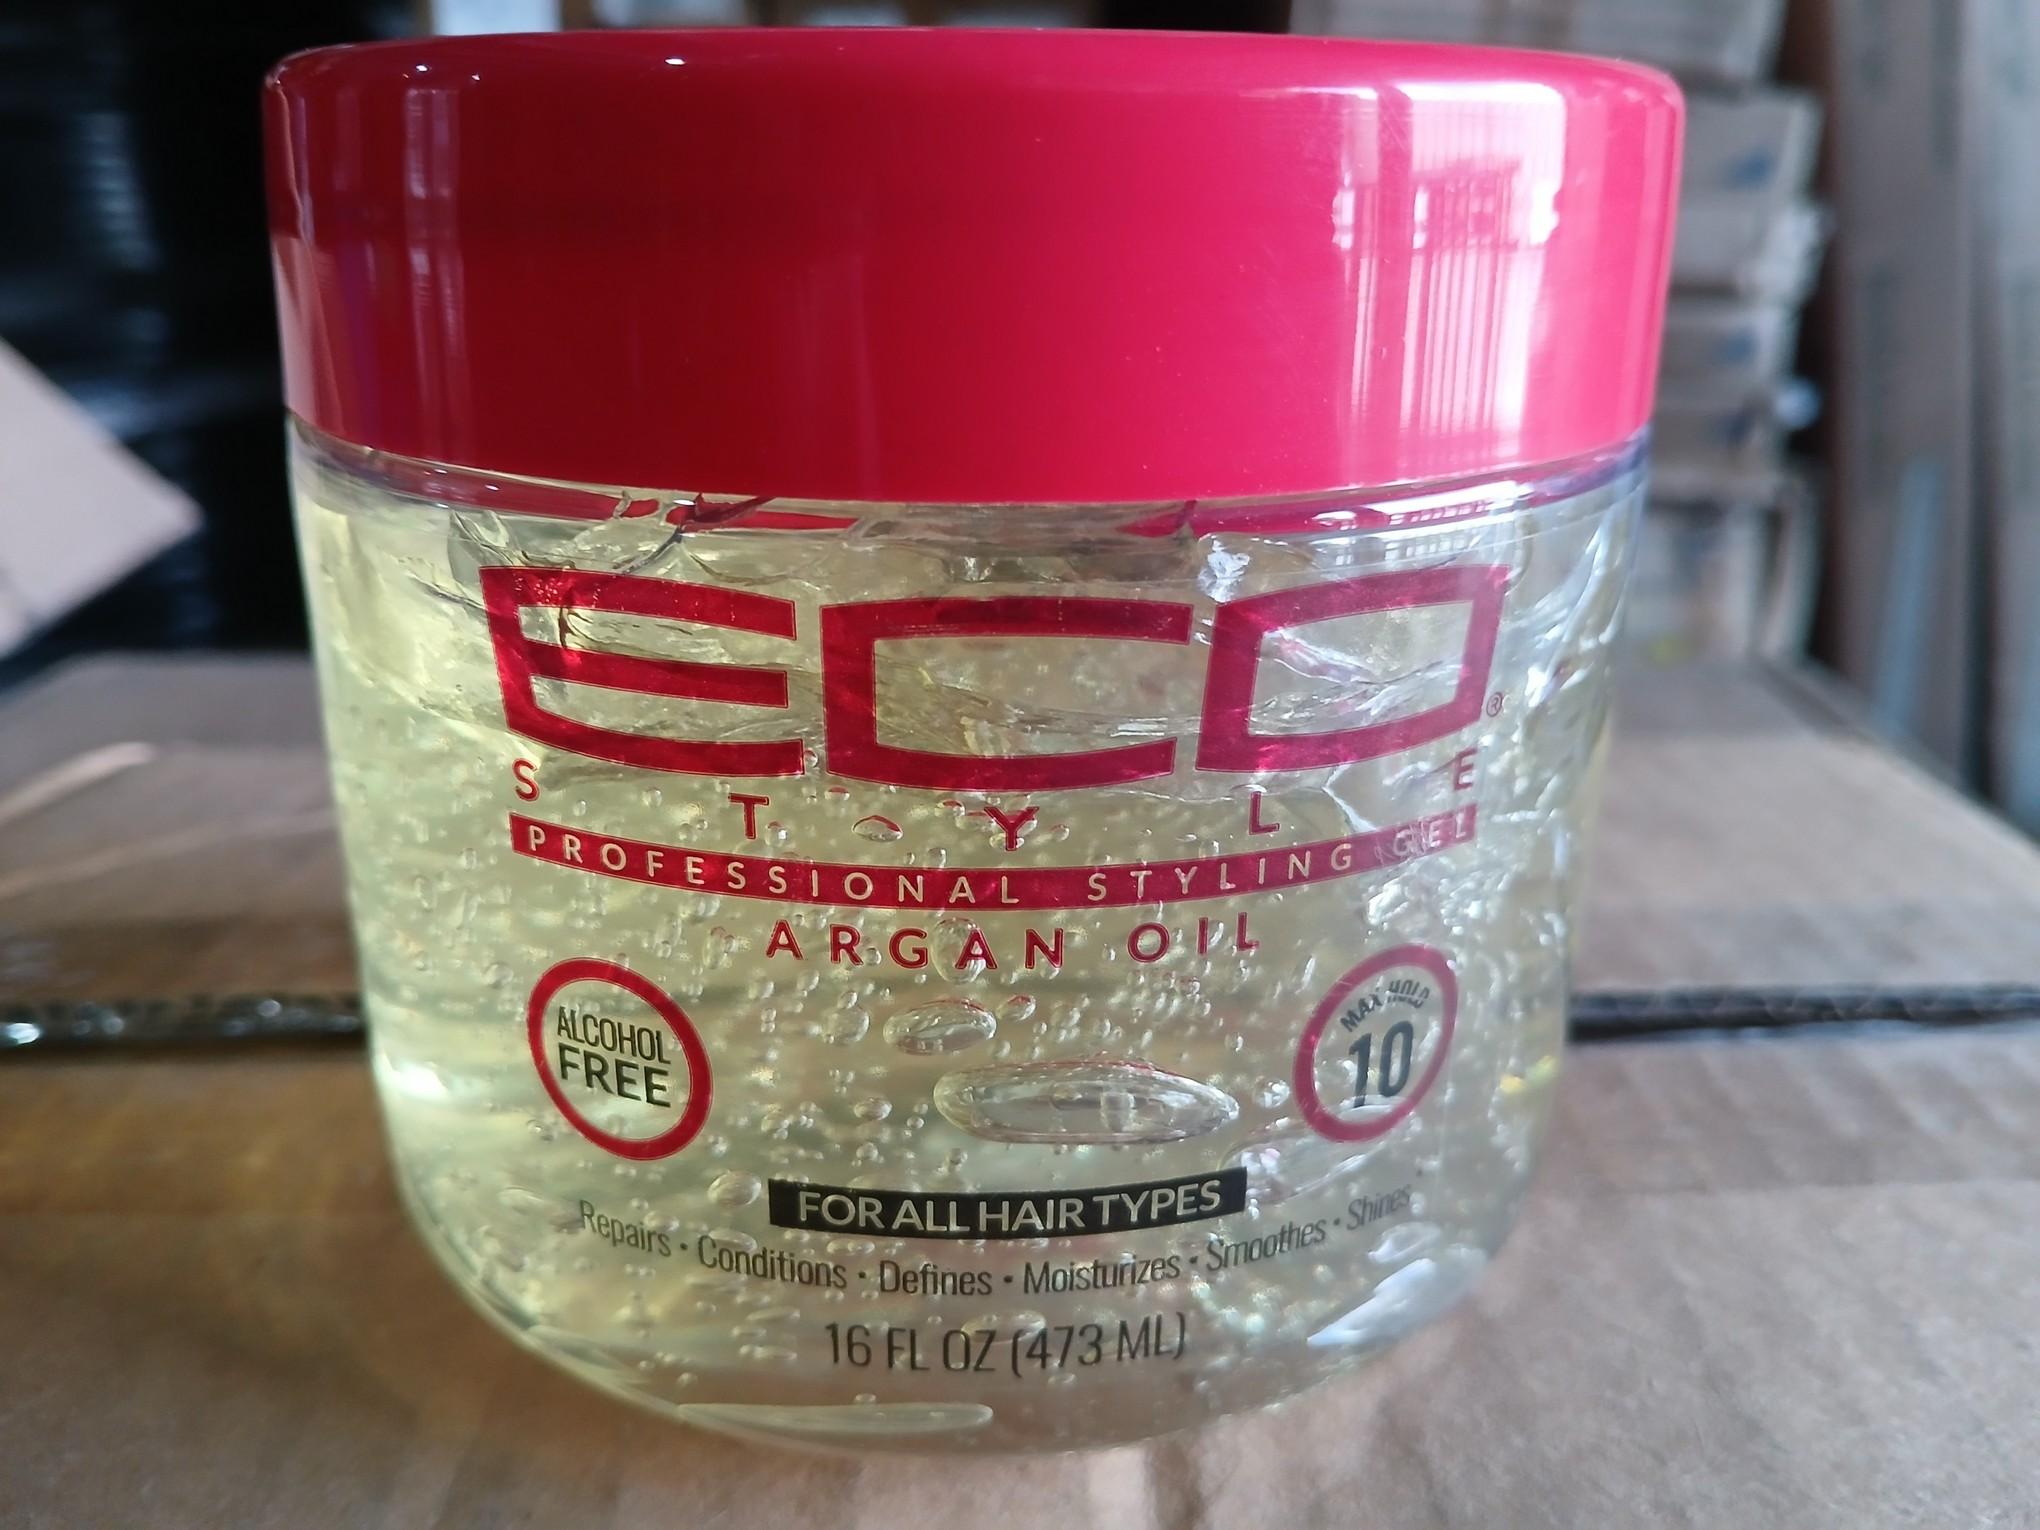 ECO Style Professional Styling ARGAN OIL / Hair Gel Case has (6) Bottles and we are selling by the b